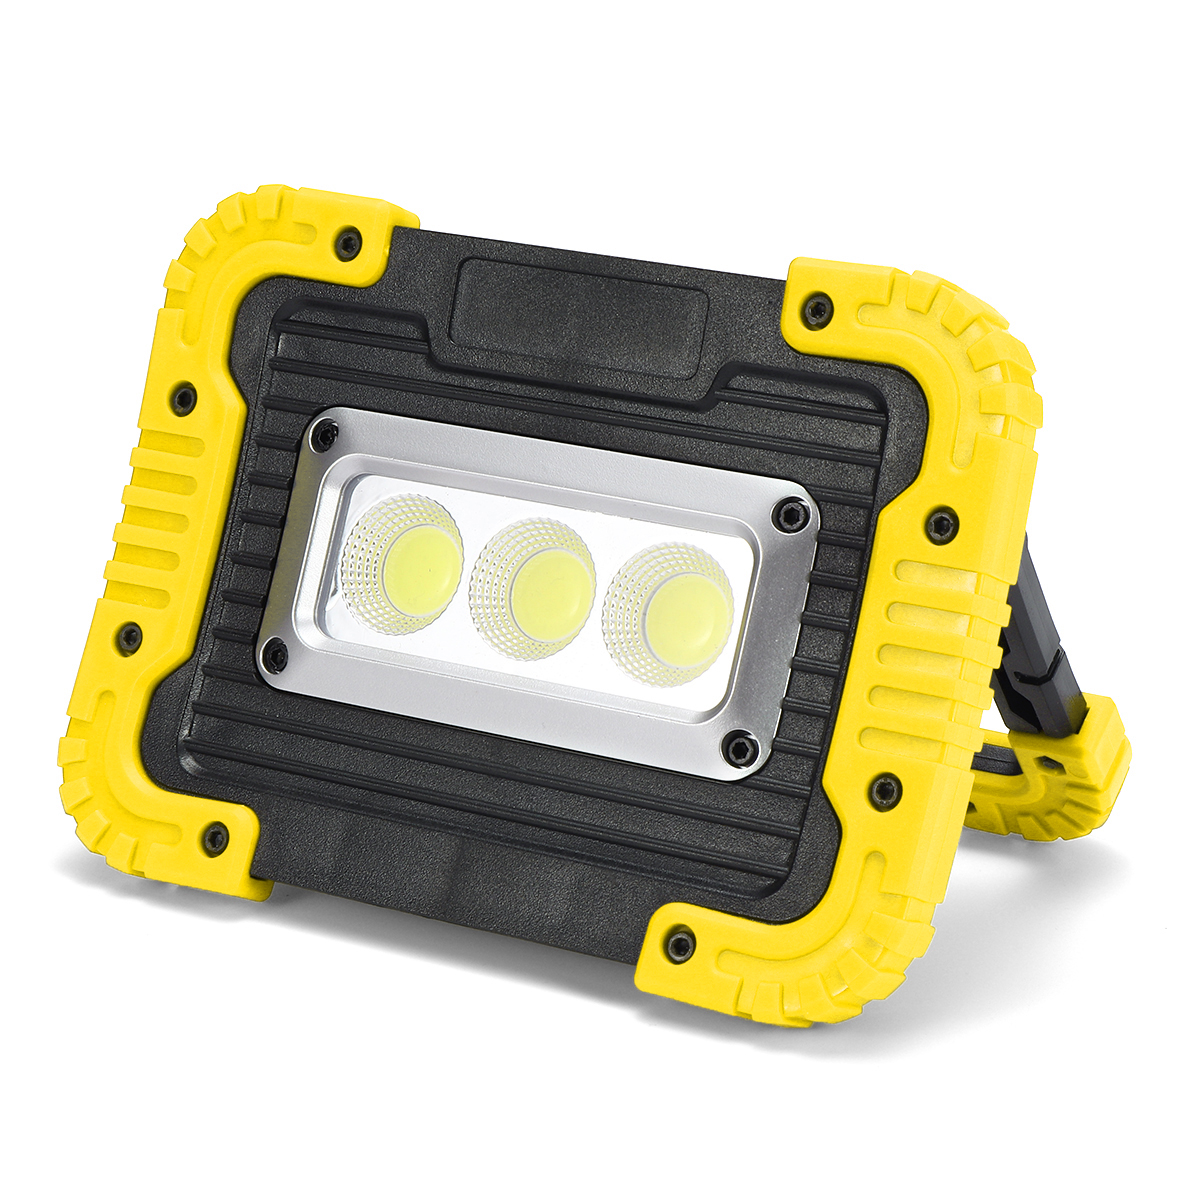 380W-Work-Flood-Light-Rechargeable-Portable-COB-LED-Spot-Lamp-Outdoor-Camping-1654485-7